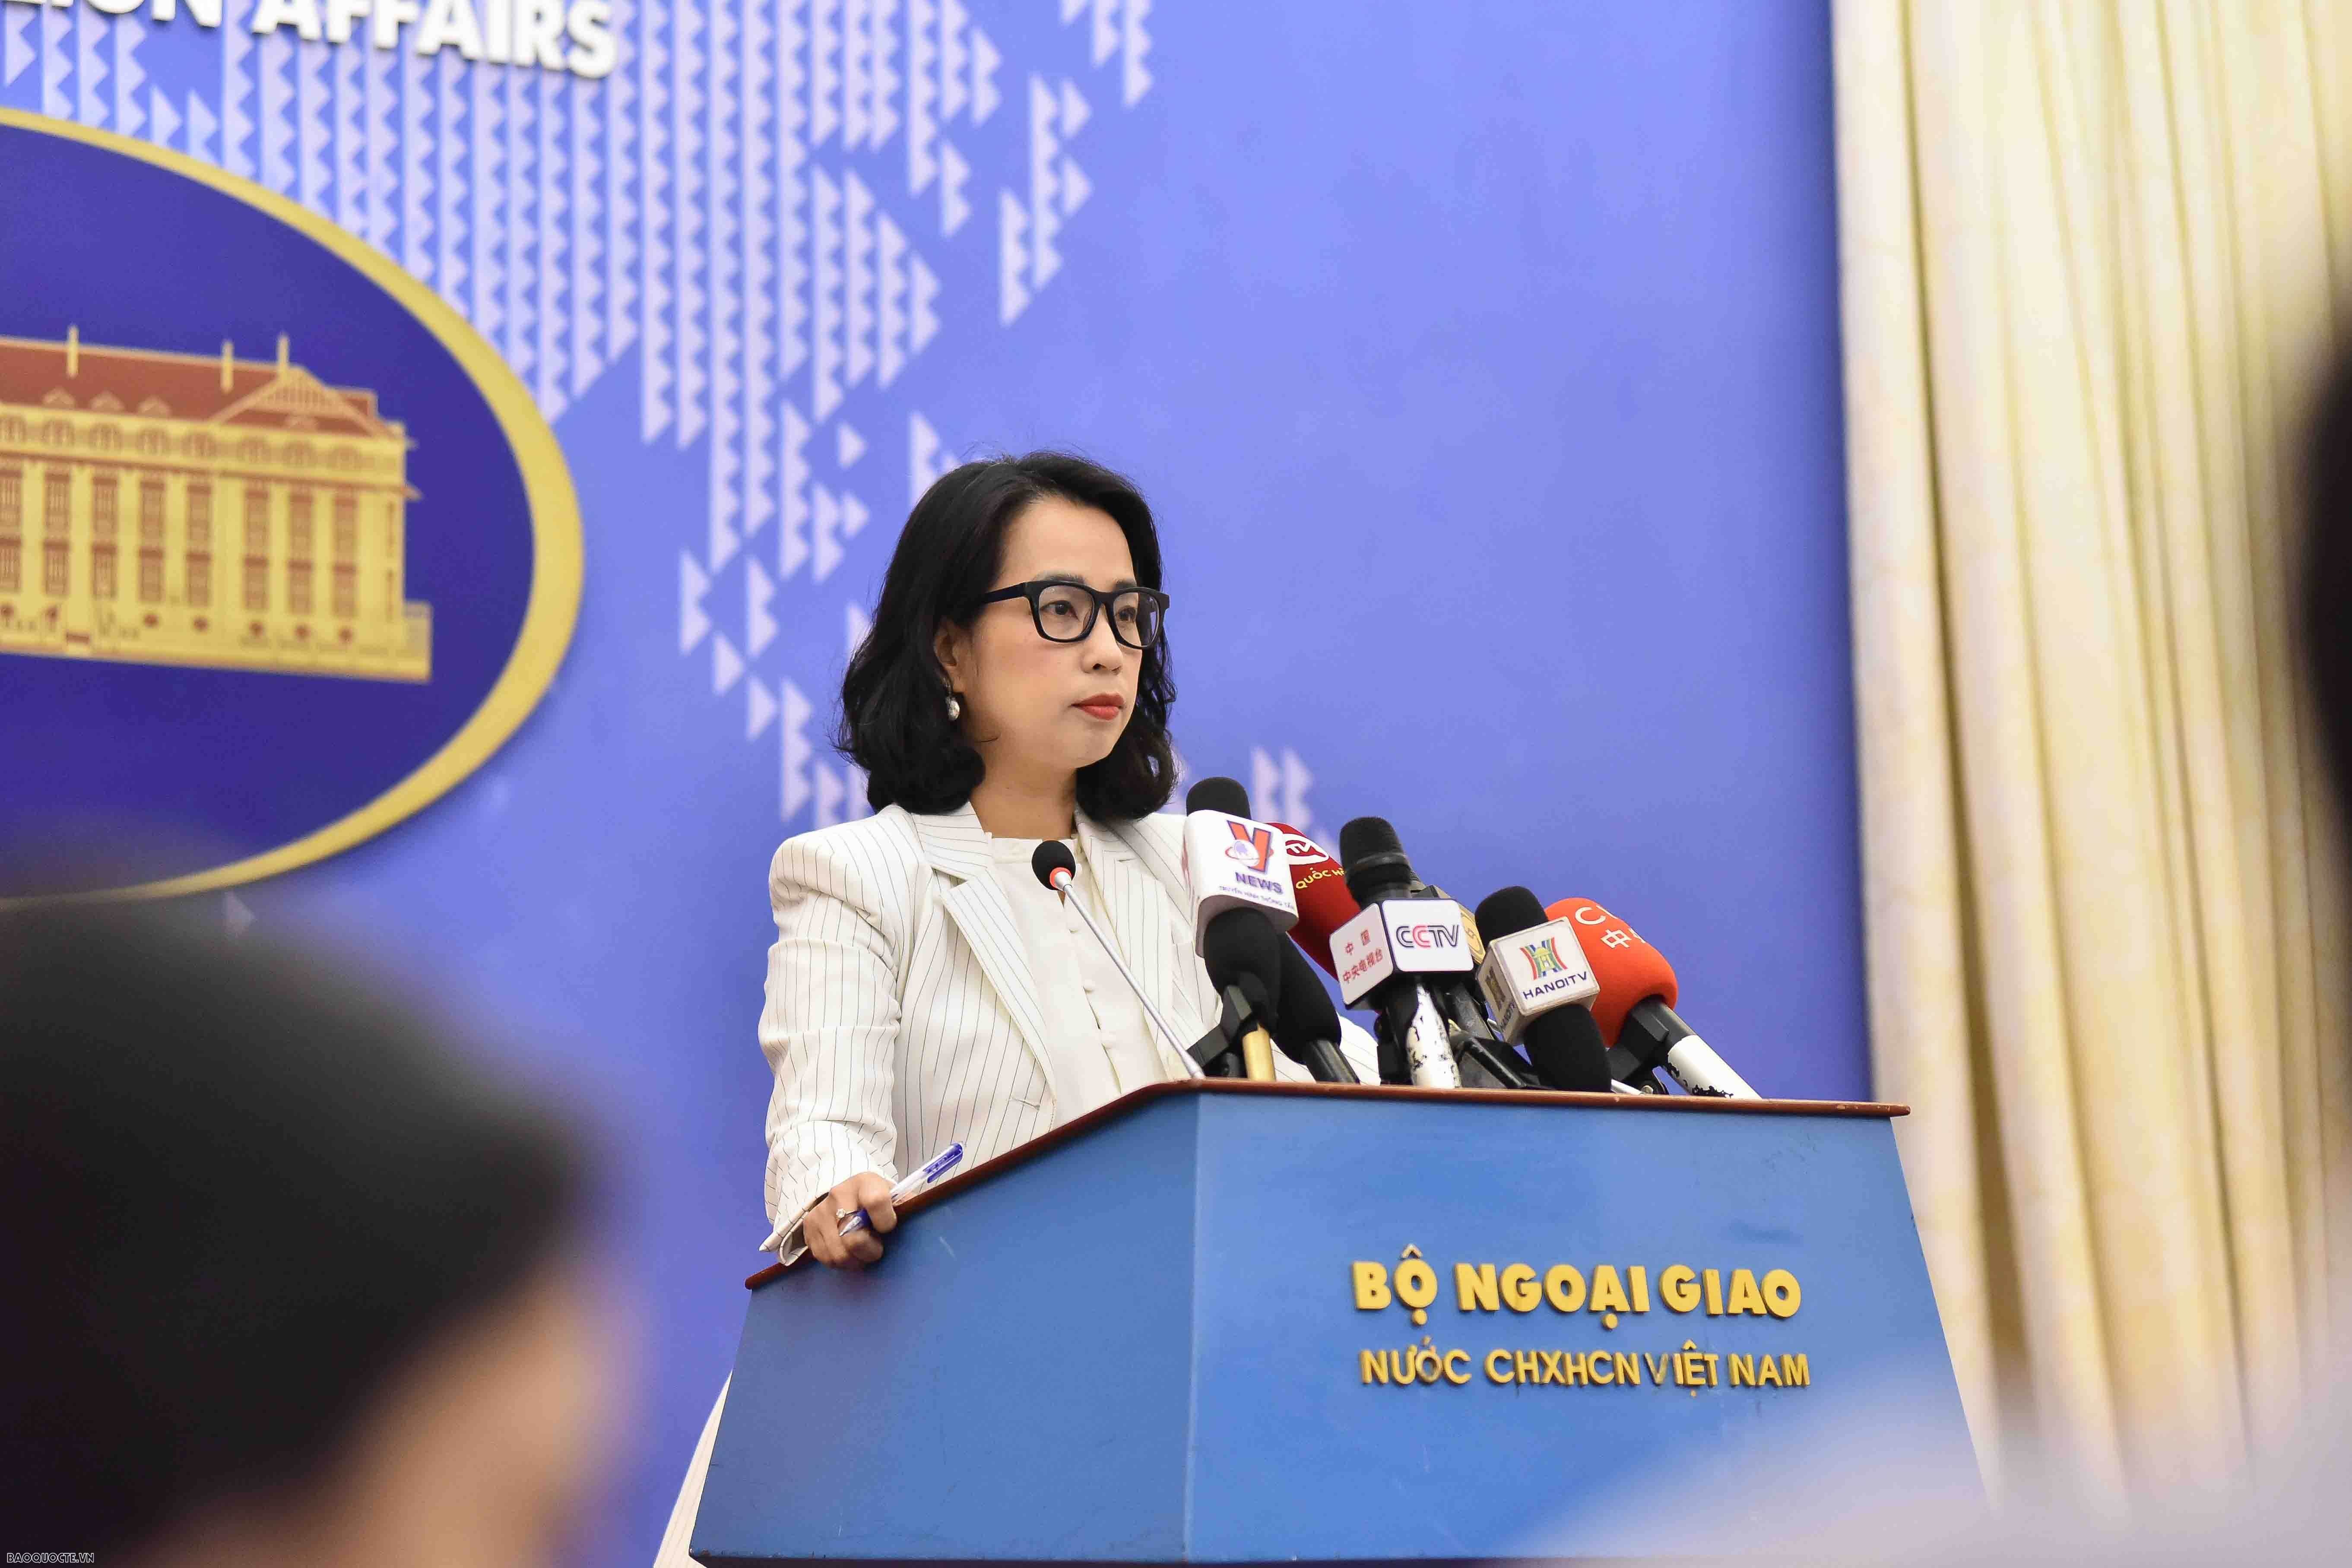 EU Report put a number of unobjective comments on Vietnam’s human rights situation: Spokesperson